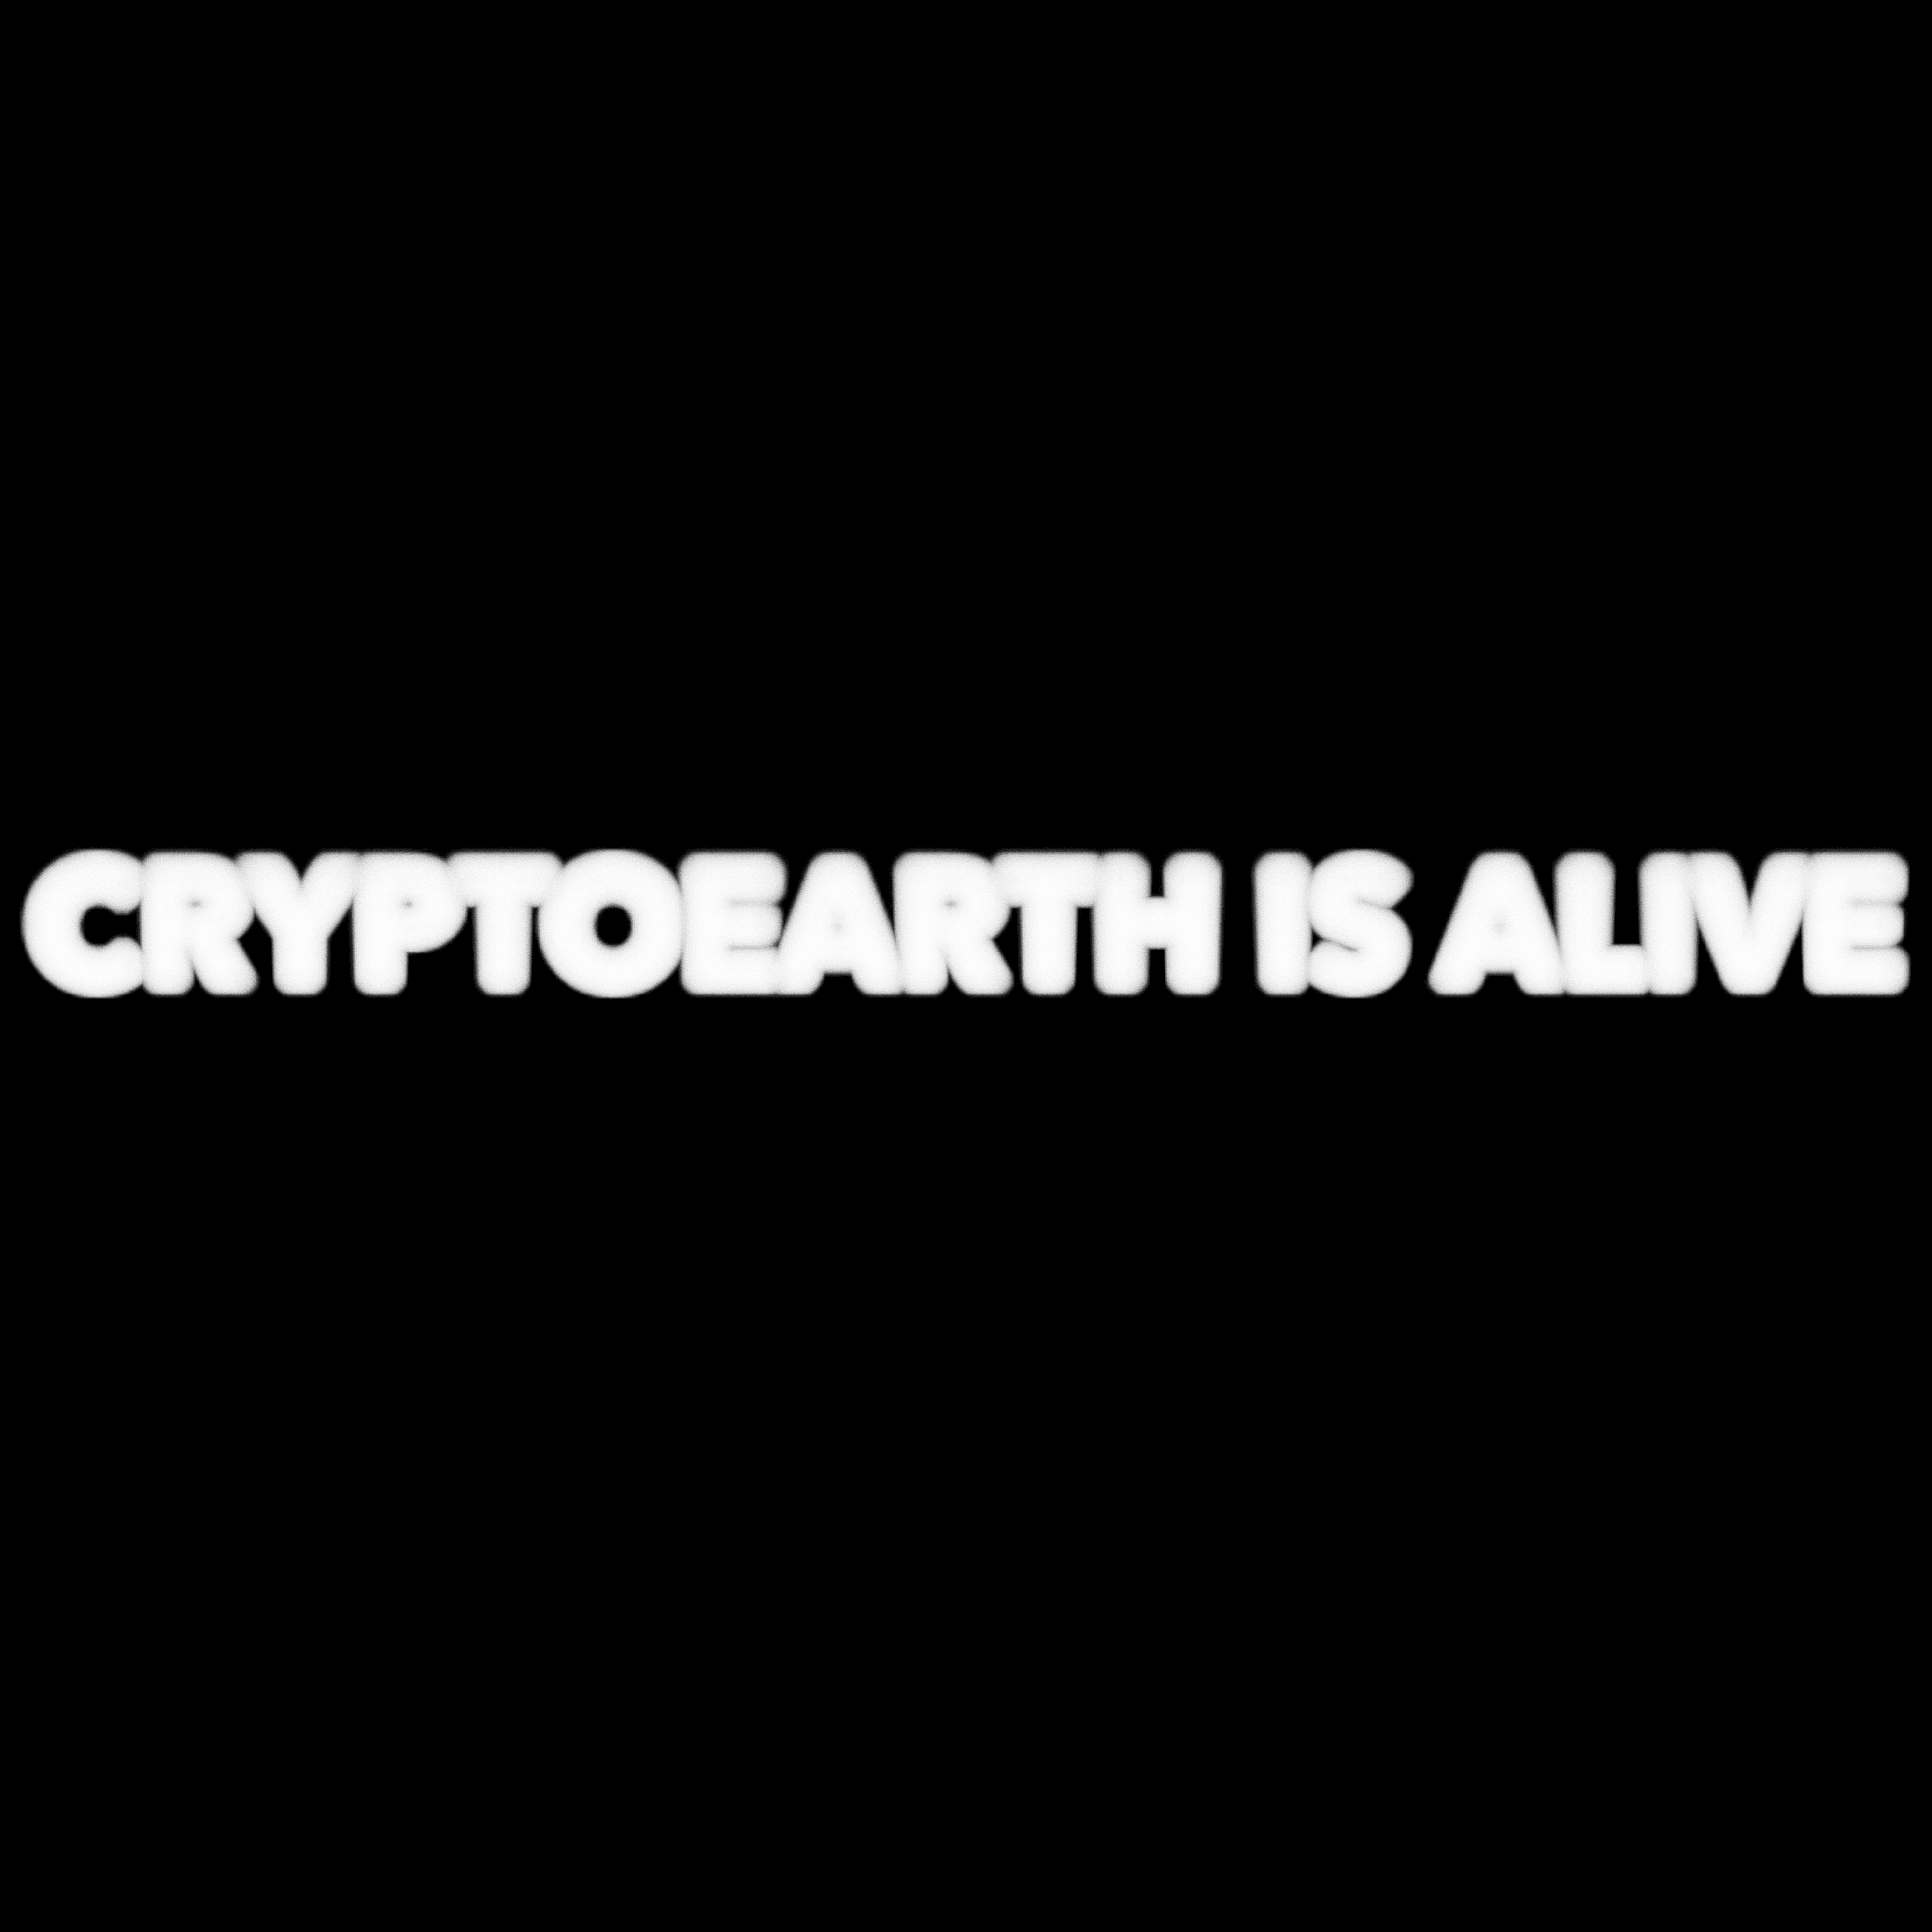 CRYPTOEARTH IS ALIVE || theYRDGZ